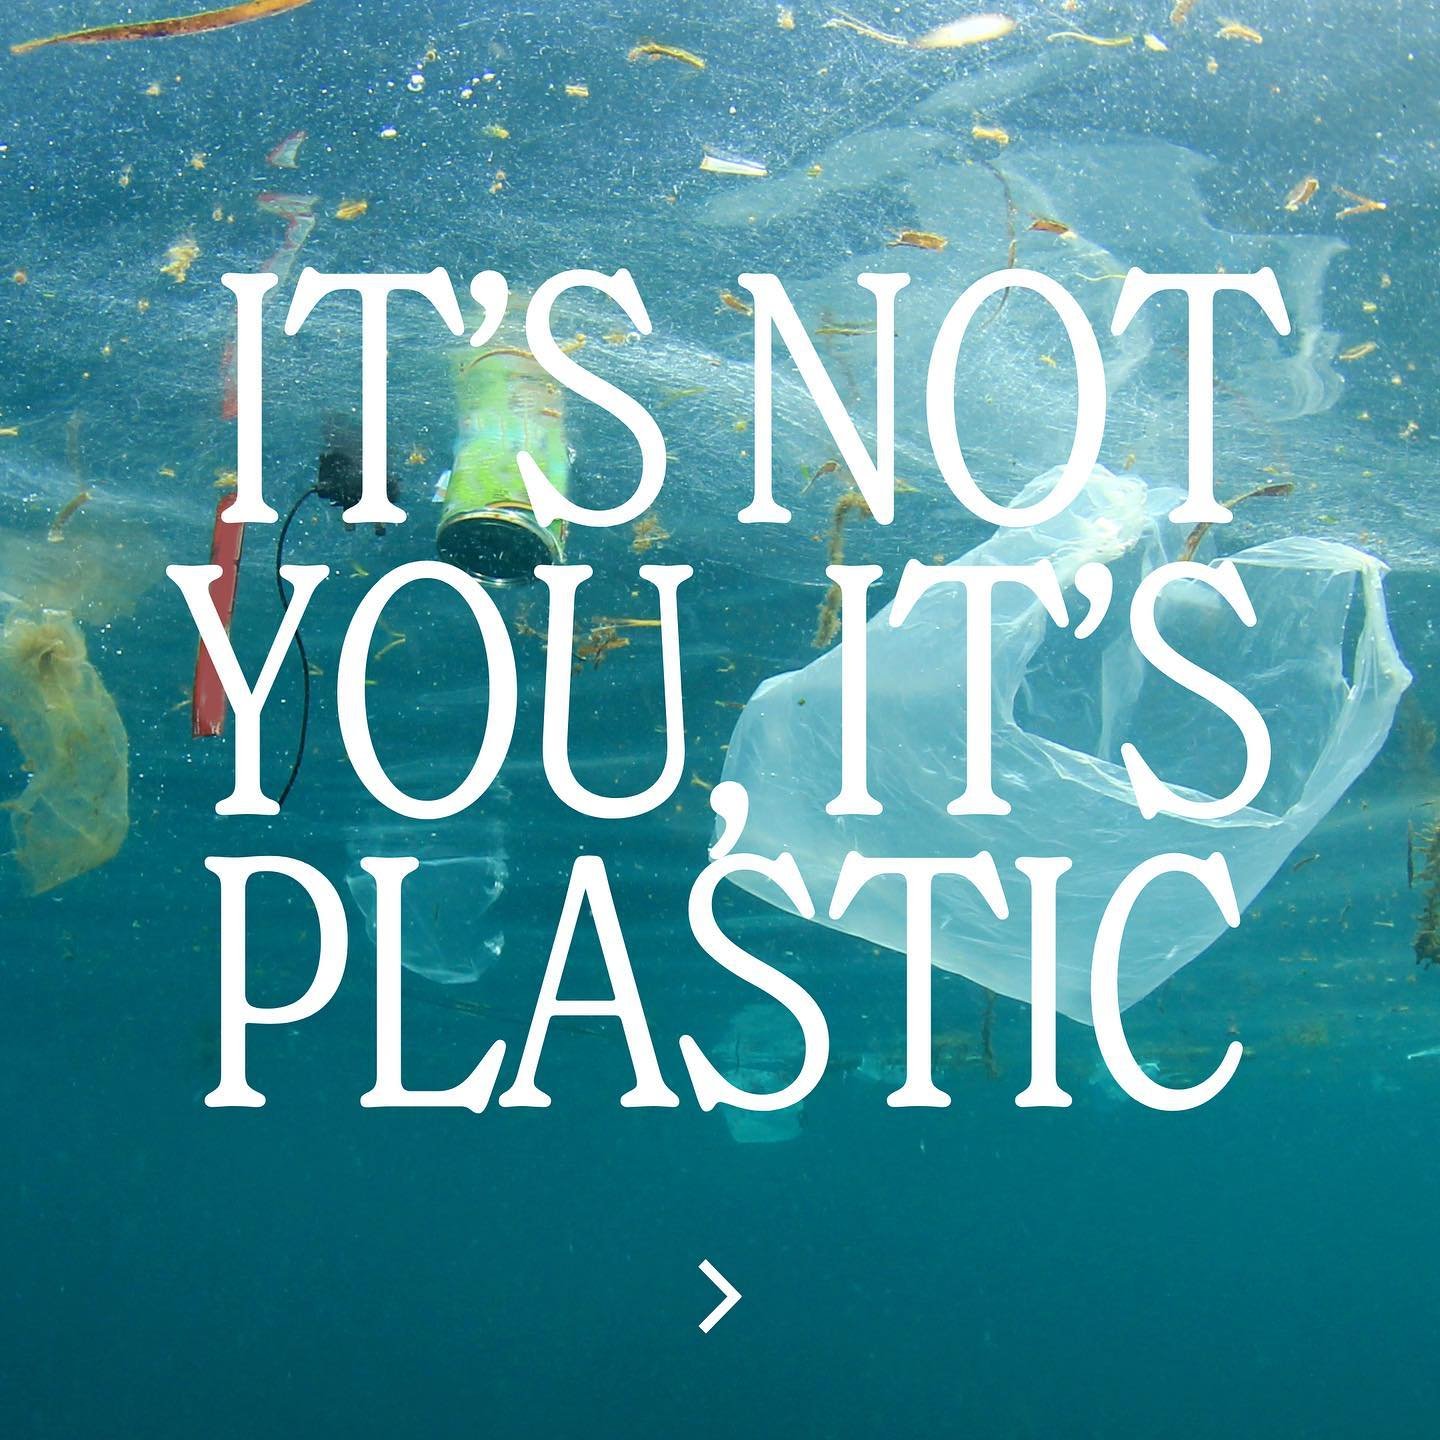 ITS NOT YOU ITS PLASTIC. 

Scroll to learn more about the history and impact of plastics in our ocean. 

Visit the link in our bio to learn more about organisations tackling this vital issue. 🤍 

Subscribe to our news letter TODAY to get more insigh